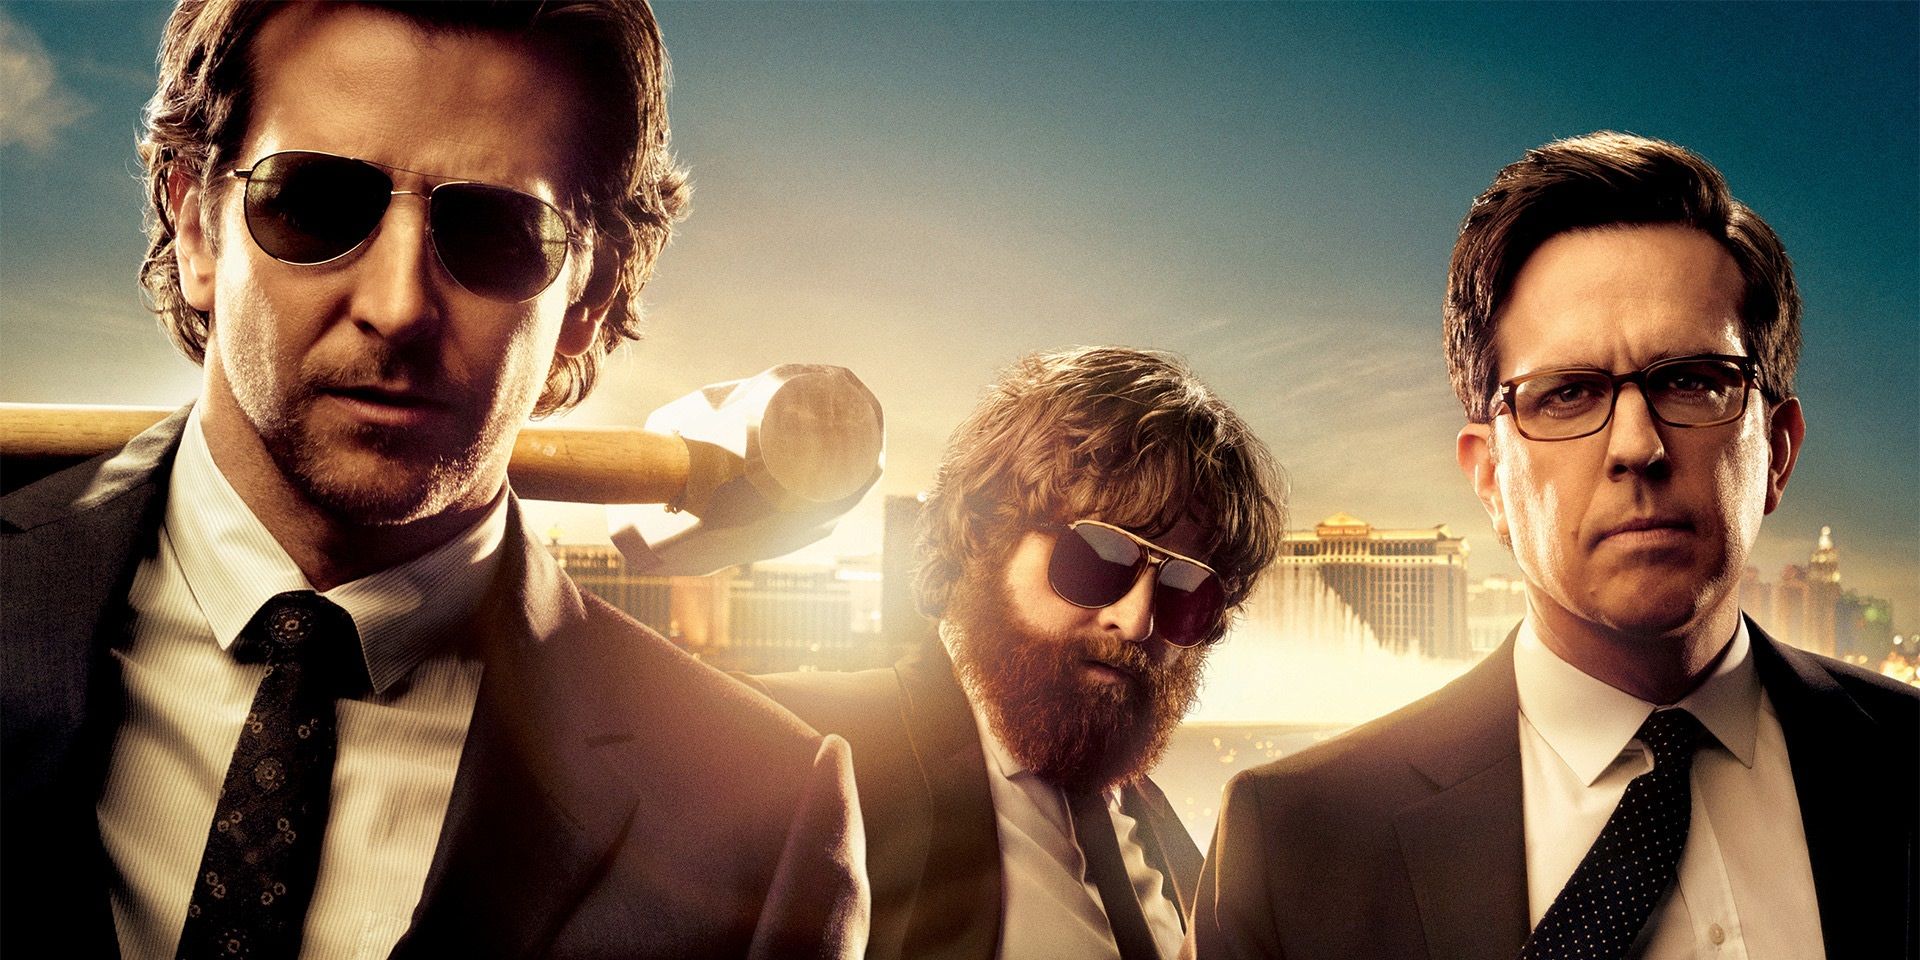 Bradley Cooper, Zach Galafianakis, and Ed Helms in The Hangover